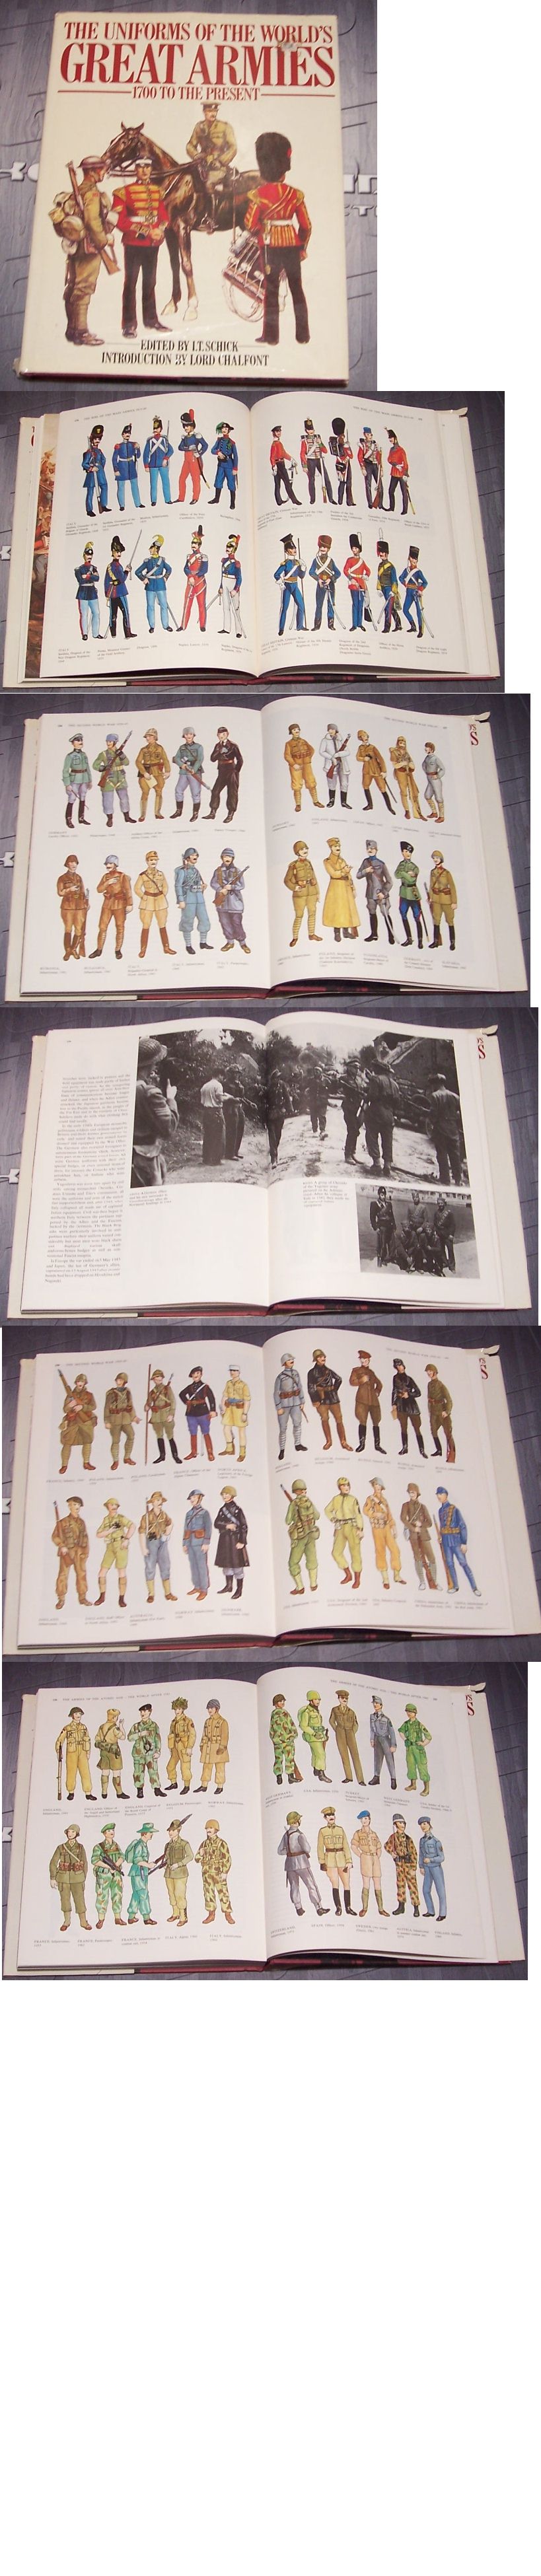 Uniforms of the World's Great Armies